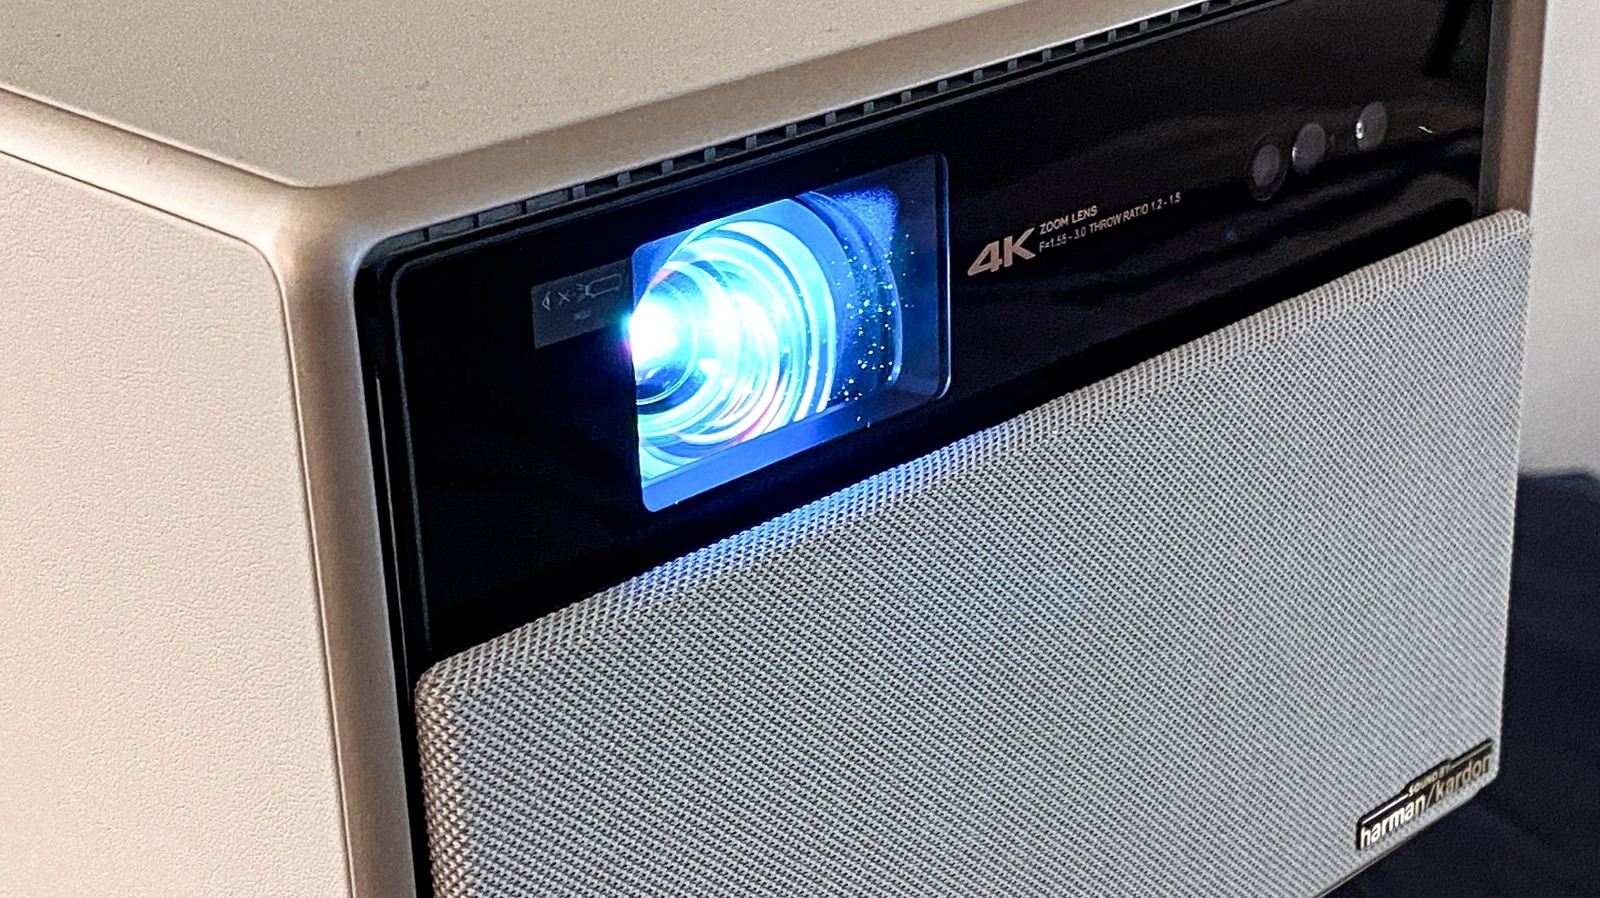 Xgimi Horizon Pro 4K projector review: Provides fantastic 4K imagery